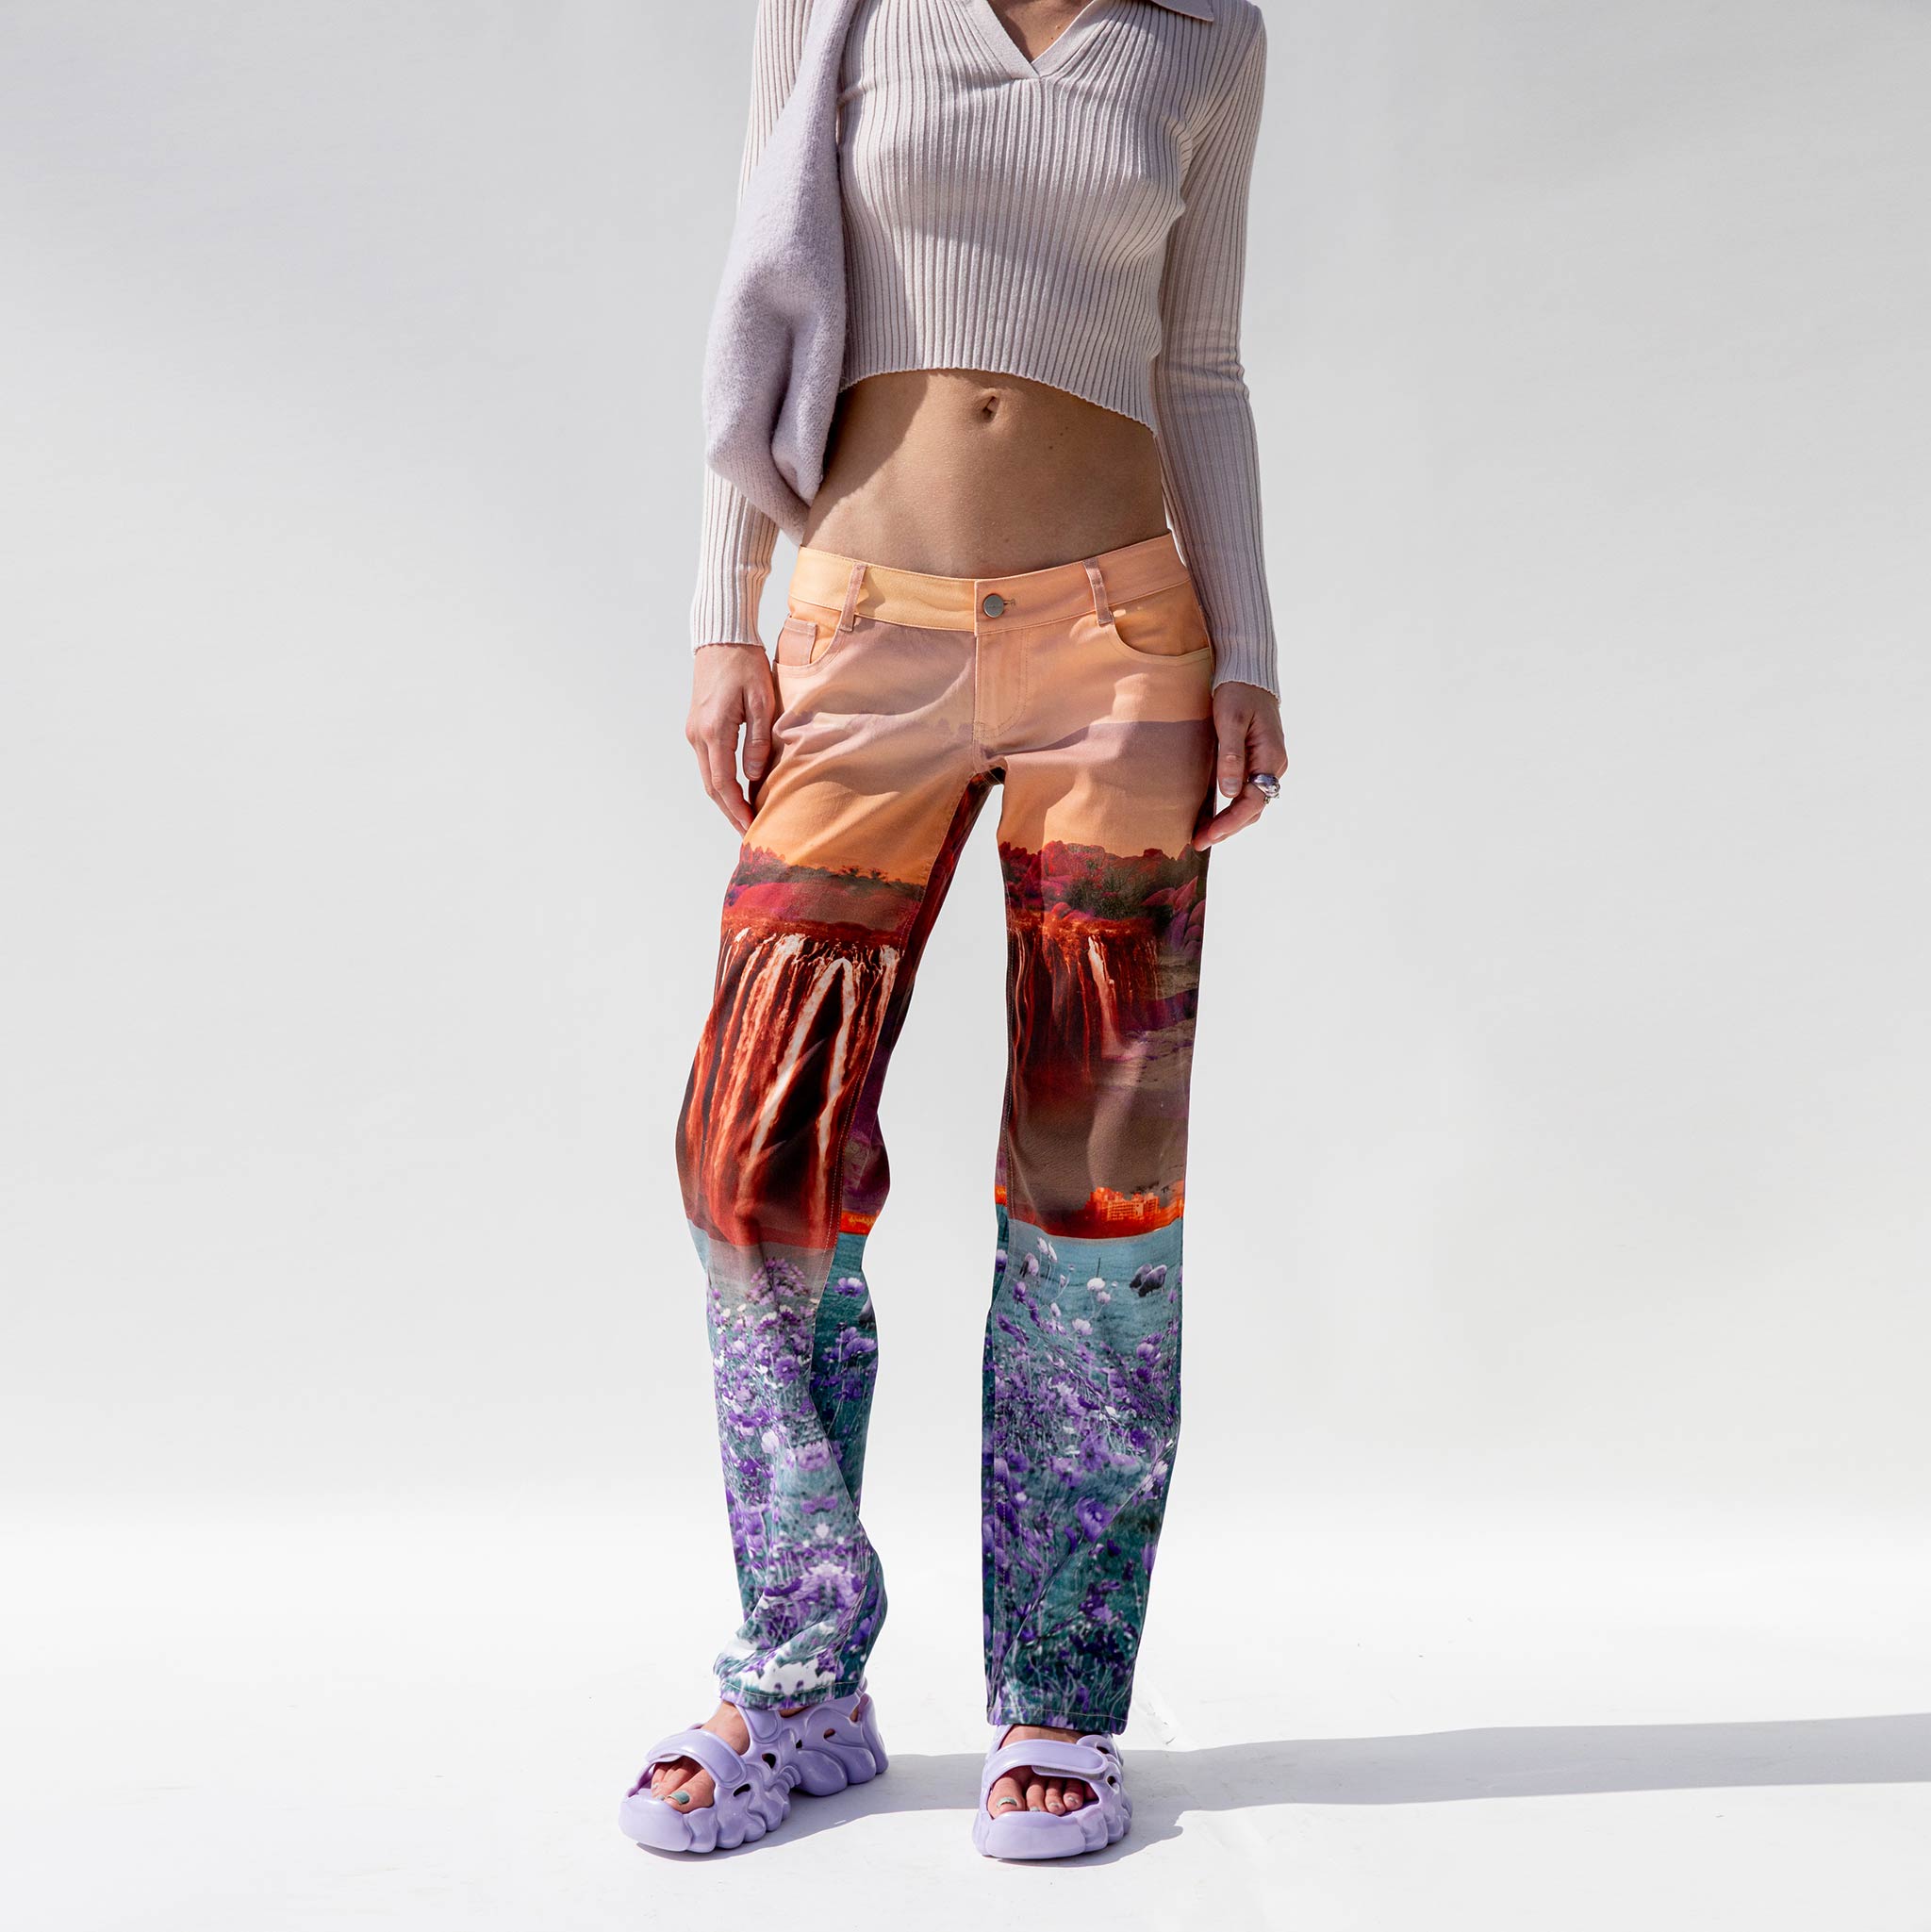 Miaou Atlas Pants featuring collaged landscape prints, front view as worn by a model.